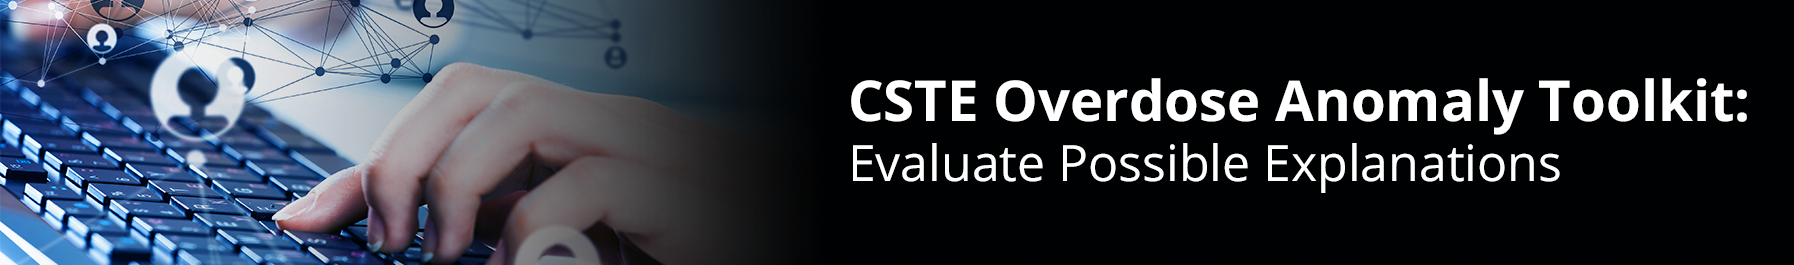 CSTE Overdose Anomaly Toolkit: Evaluate Possible Explanations